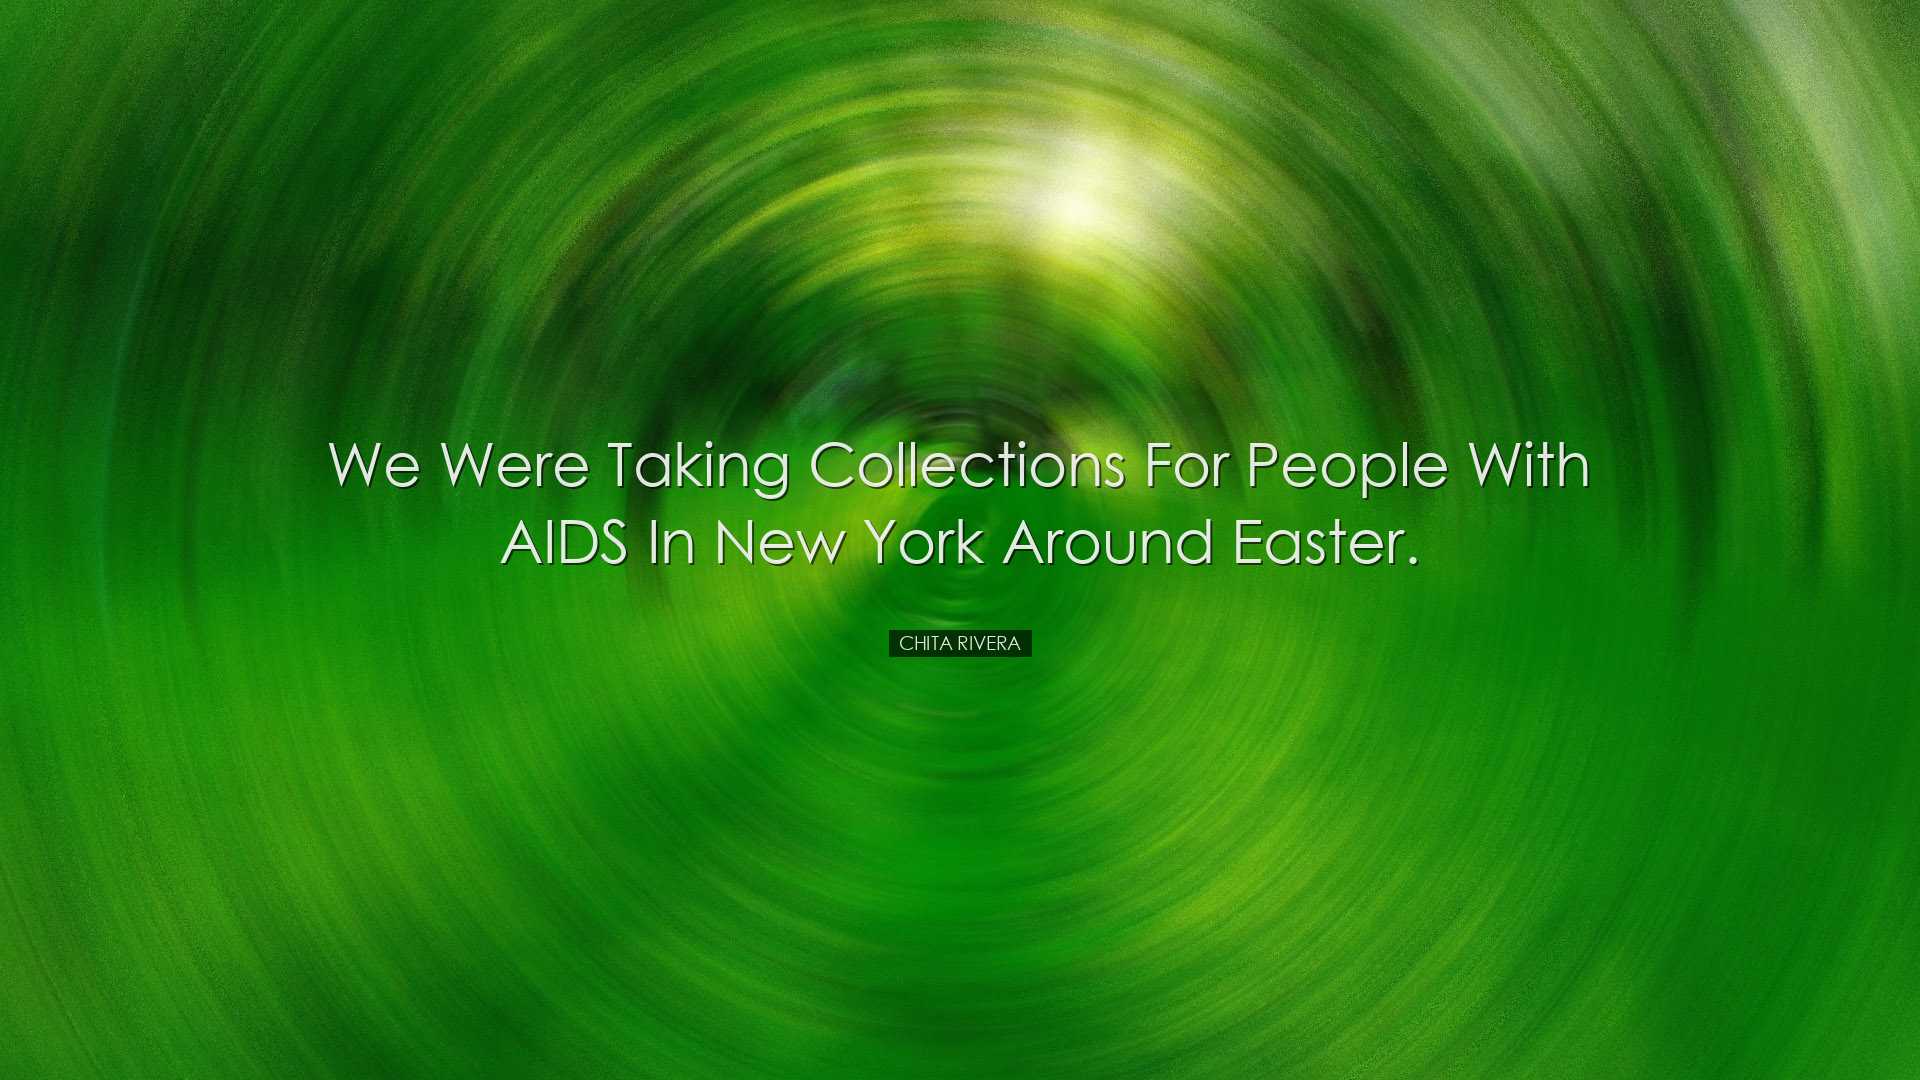 We were taking collections for people with AIDS in New York around